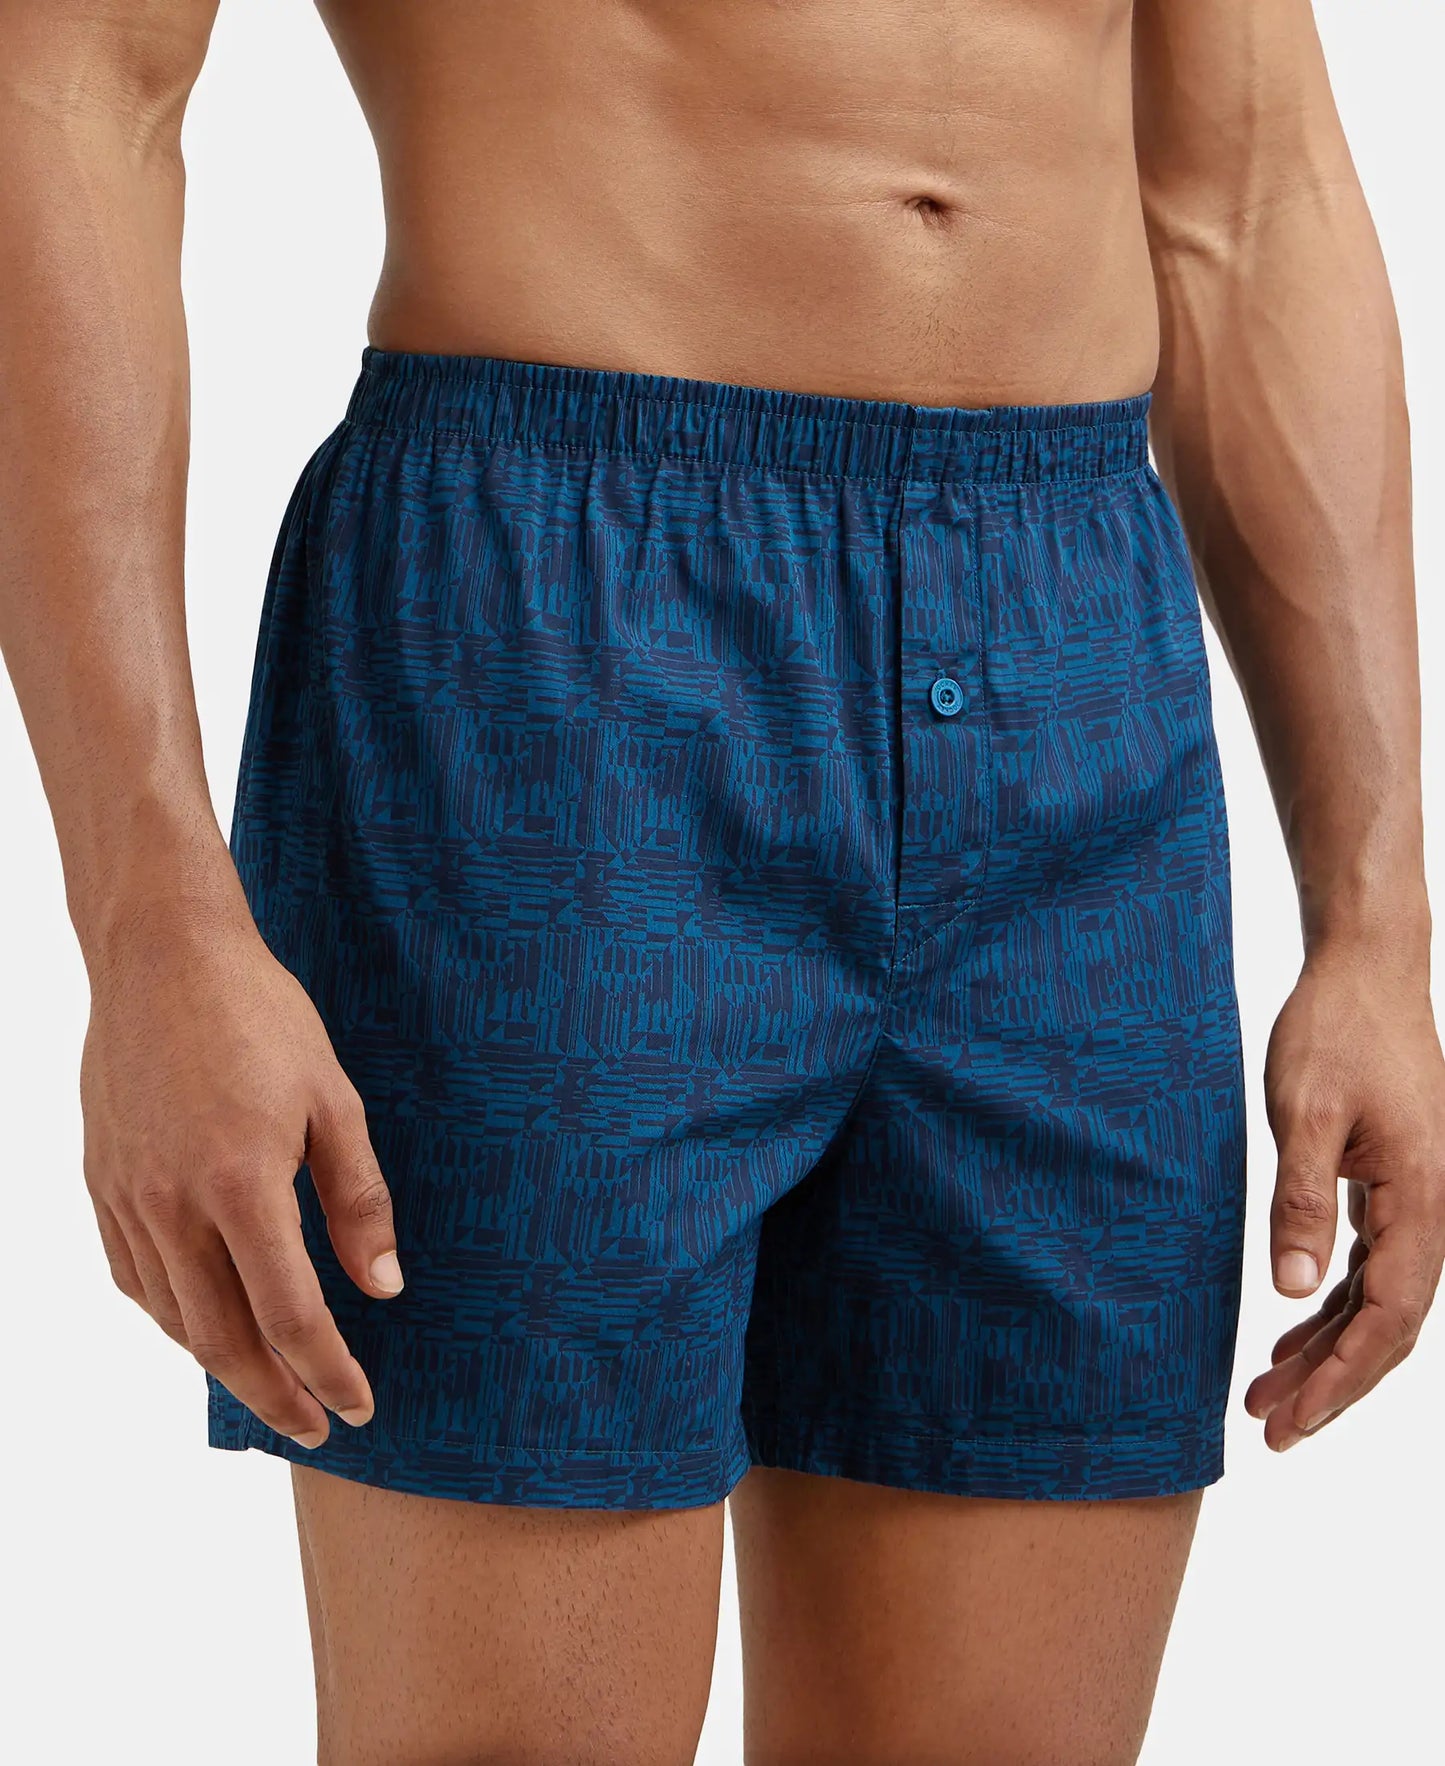 Super Combed Mercerized Cotton Woven Checkered Inner Boxers with Ultrasoft and Durable Inner Waistband - Mauve Wine & Seaport Teal-4